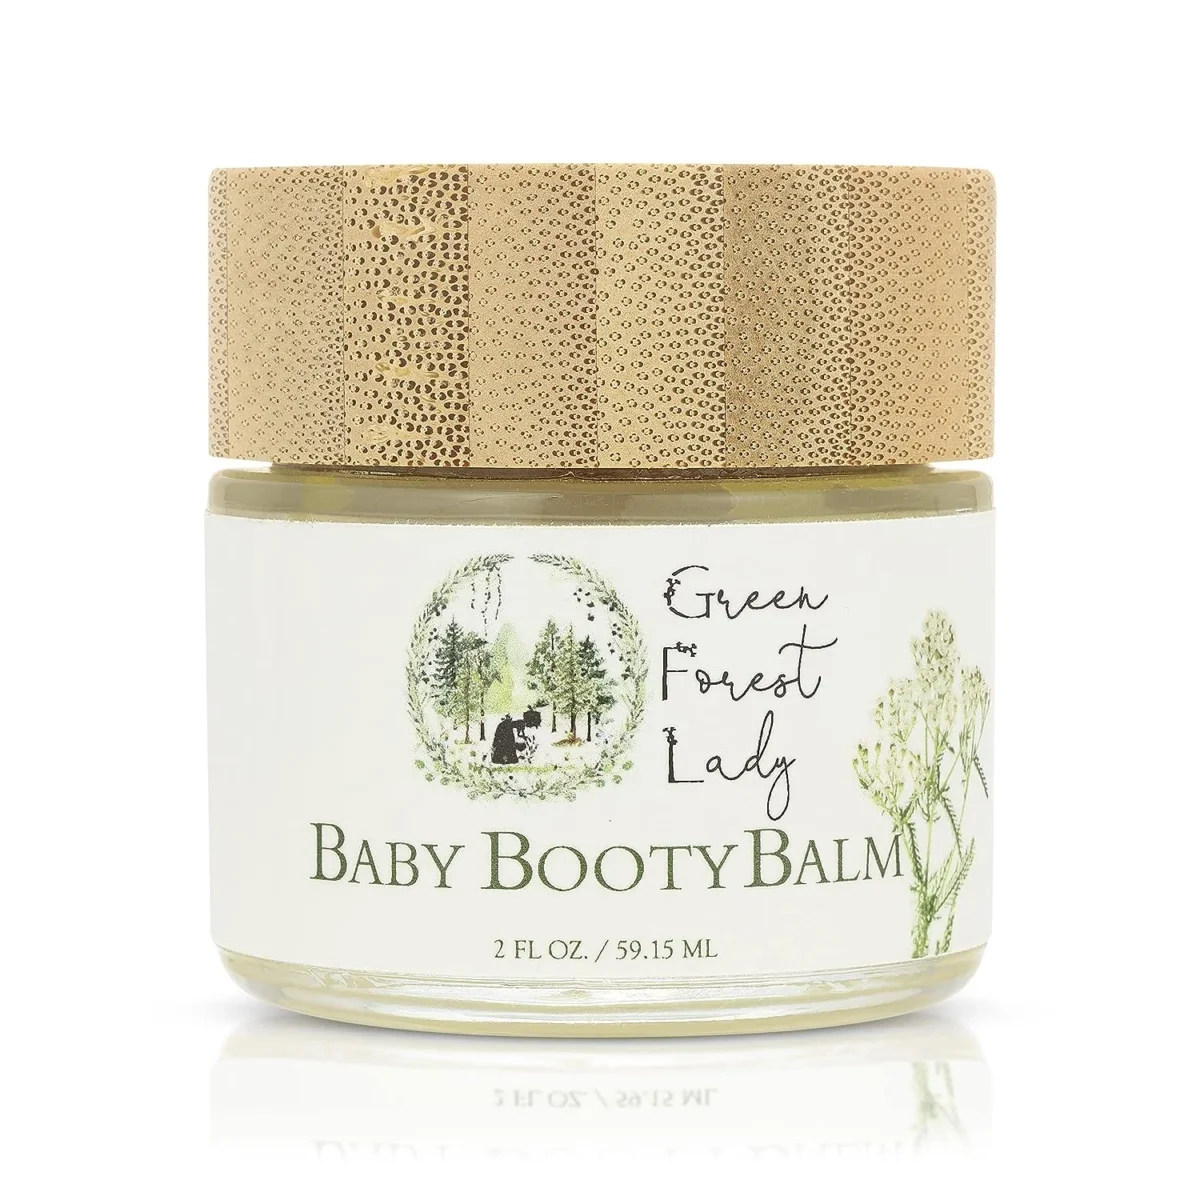 Baby Care, Baby Skin Care Baby, Baby Booty Balm